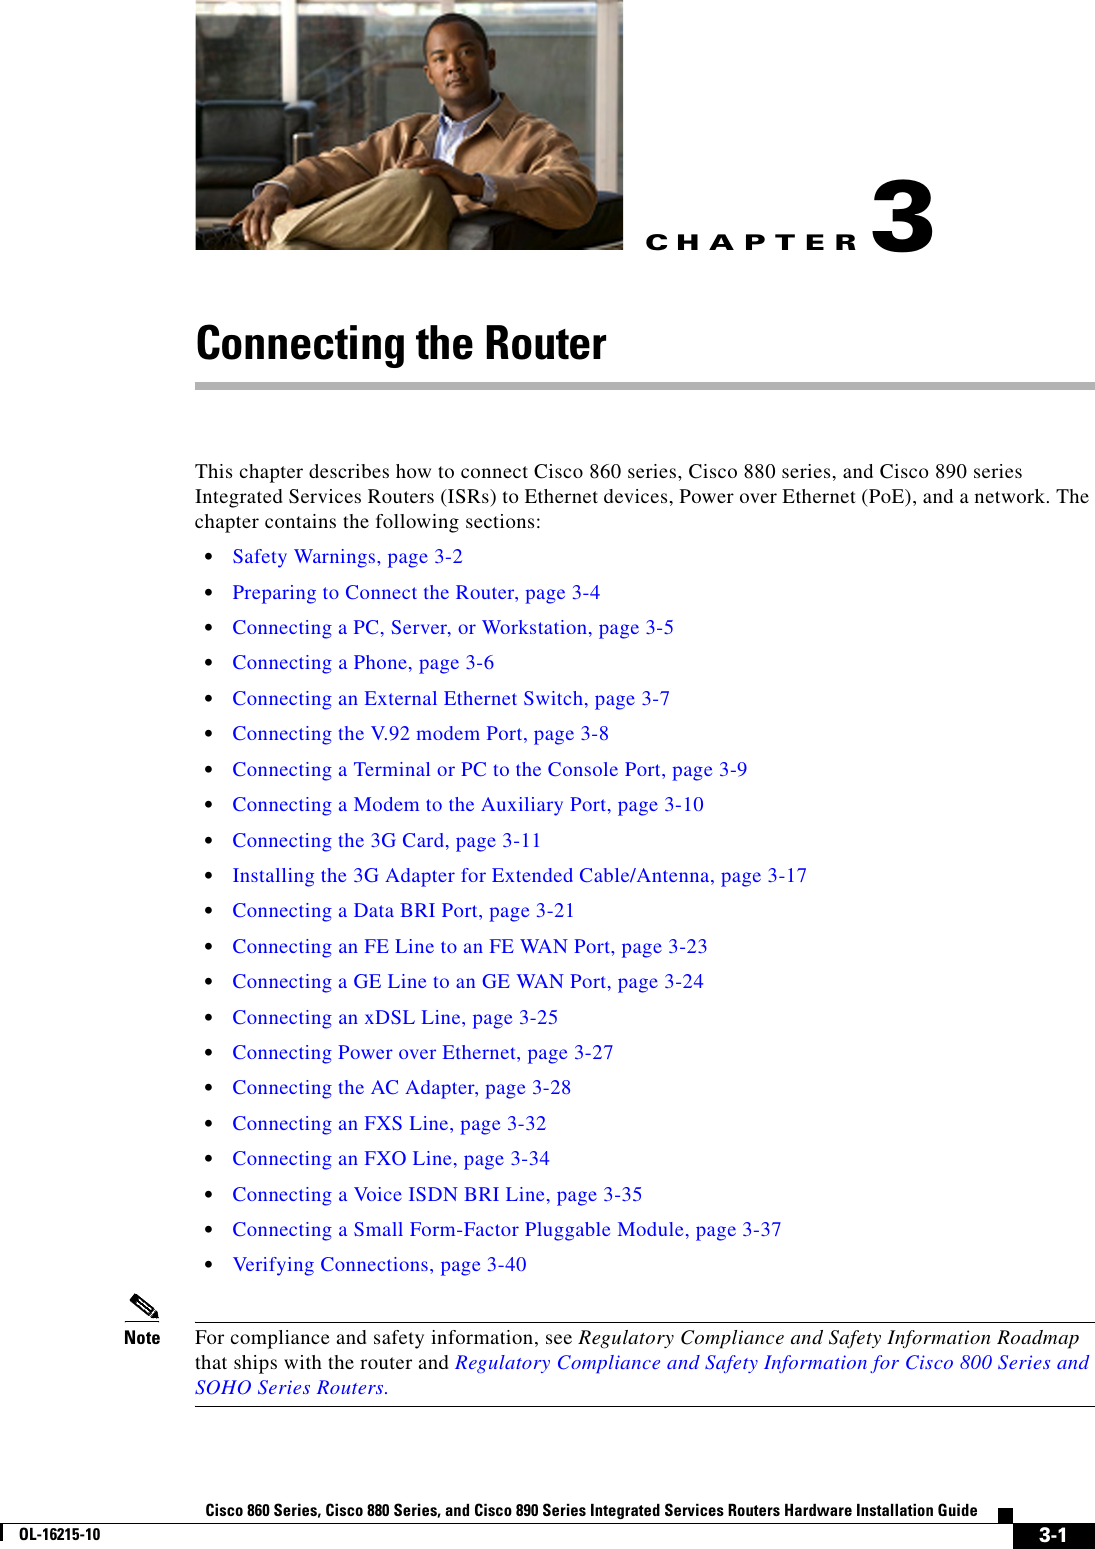 CHAPTER 3-1Cisco 860 Series, Cisco 880 Series, and Cisco 890 Series Integrated Services Routers Hardware Installation GuideOL-16215-103Connecting the RouterThis chapter describes how to connect Cisco 860 series, Cisco 880 series, and Cisco 890 series Integrated Services Routers (ISRs) to Ethernet devices, Power over Ethernet (PoE), and a network. The chapter contains the following sections:  • Safety Warnings, page 3-2  • Preparing to Connect the Router, page 3-4  • Connecting a PC, Server, or Workstation, page 3-5  • Connecting a Phone, page 3-6  • Connecting an External Ethernet Switch, page 3-7  • Connecting the V.92 modem Port, page 3-8  • Connecting a Terminal or PC to the Console Port, page 3-9  • Connecting a Modem to the Auxiliary Port, page 3-10  • Connecting the 3G Card, page 3-11  • Installing the 3G Adapter for Extended Cable/Antenna, page 3-17  • Connecting a Data BRI Port, page 3-21  • Connecting an FE Line to an FE WAN Port, page 3-23  • Connecting a GE Line to an GE WAN Port, page 3-24  • Connecting an xDSL Line, page 3-25  • Connecting Power over Ethernet, page 3-27  • Connecting the AC Adapter, page 3-28  • Connecting an FXS Line, page 3-32  • Connecting an FXO Line, page 3-34  • Connecting a Voice ISDN BRI Line, page 3-35  • Connecting a Small Form-Factor Pluggable Module, page 3-37  • Verifying Connections, page 3-40Note For compliance and safety information, see Regulatory Compliance and Safety Information Roadmap that ships with the router and Regulatory Compliance and Safety Information for Cisco 800 Series and SOHO Series Routers.